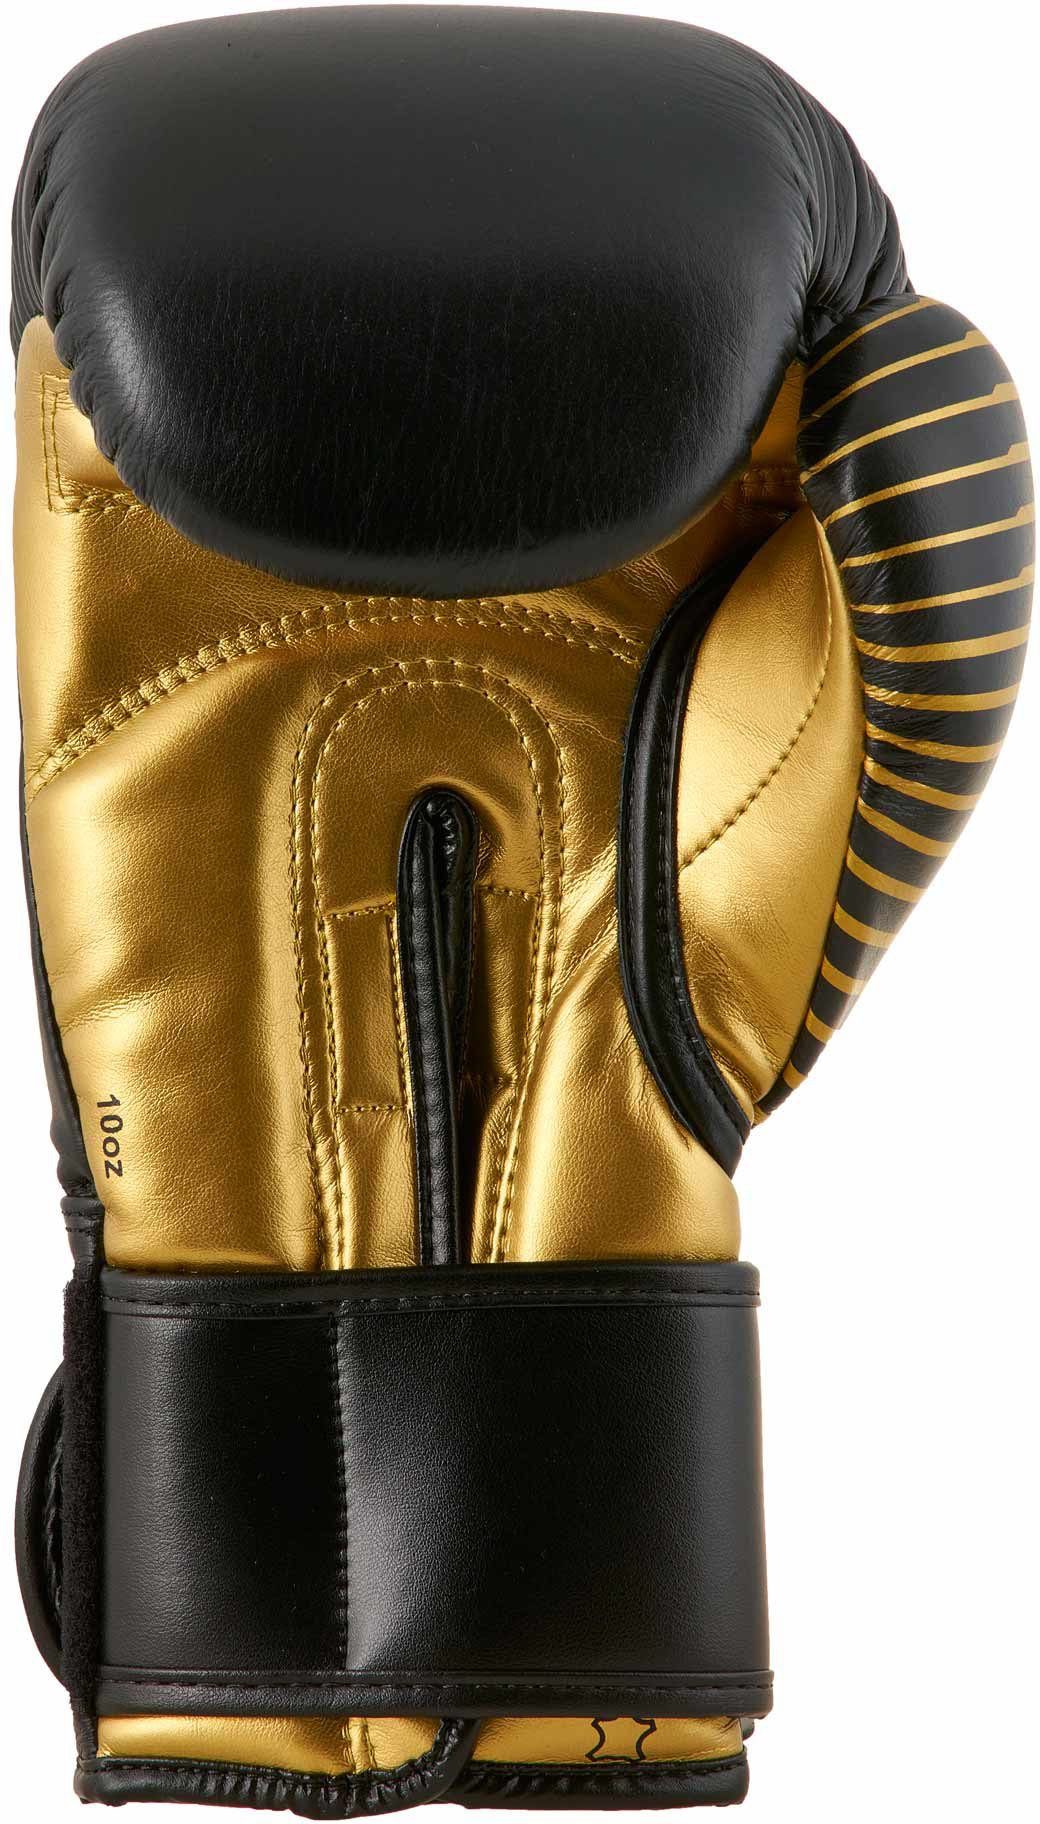 adidas Boxhandschuhe Performance black/gold Handschuh Competition